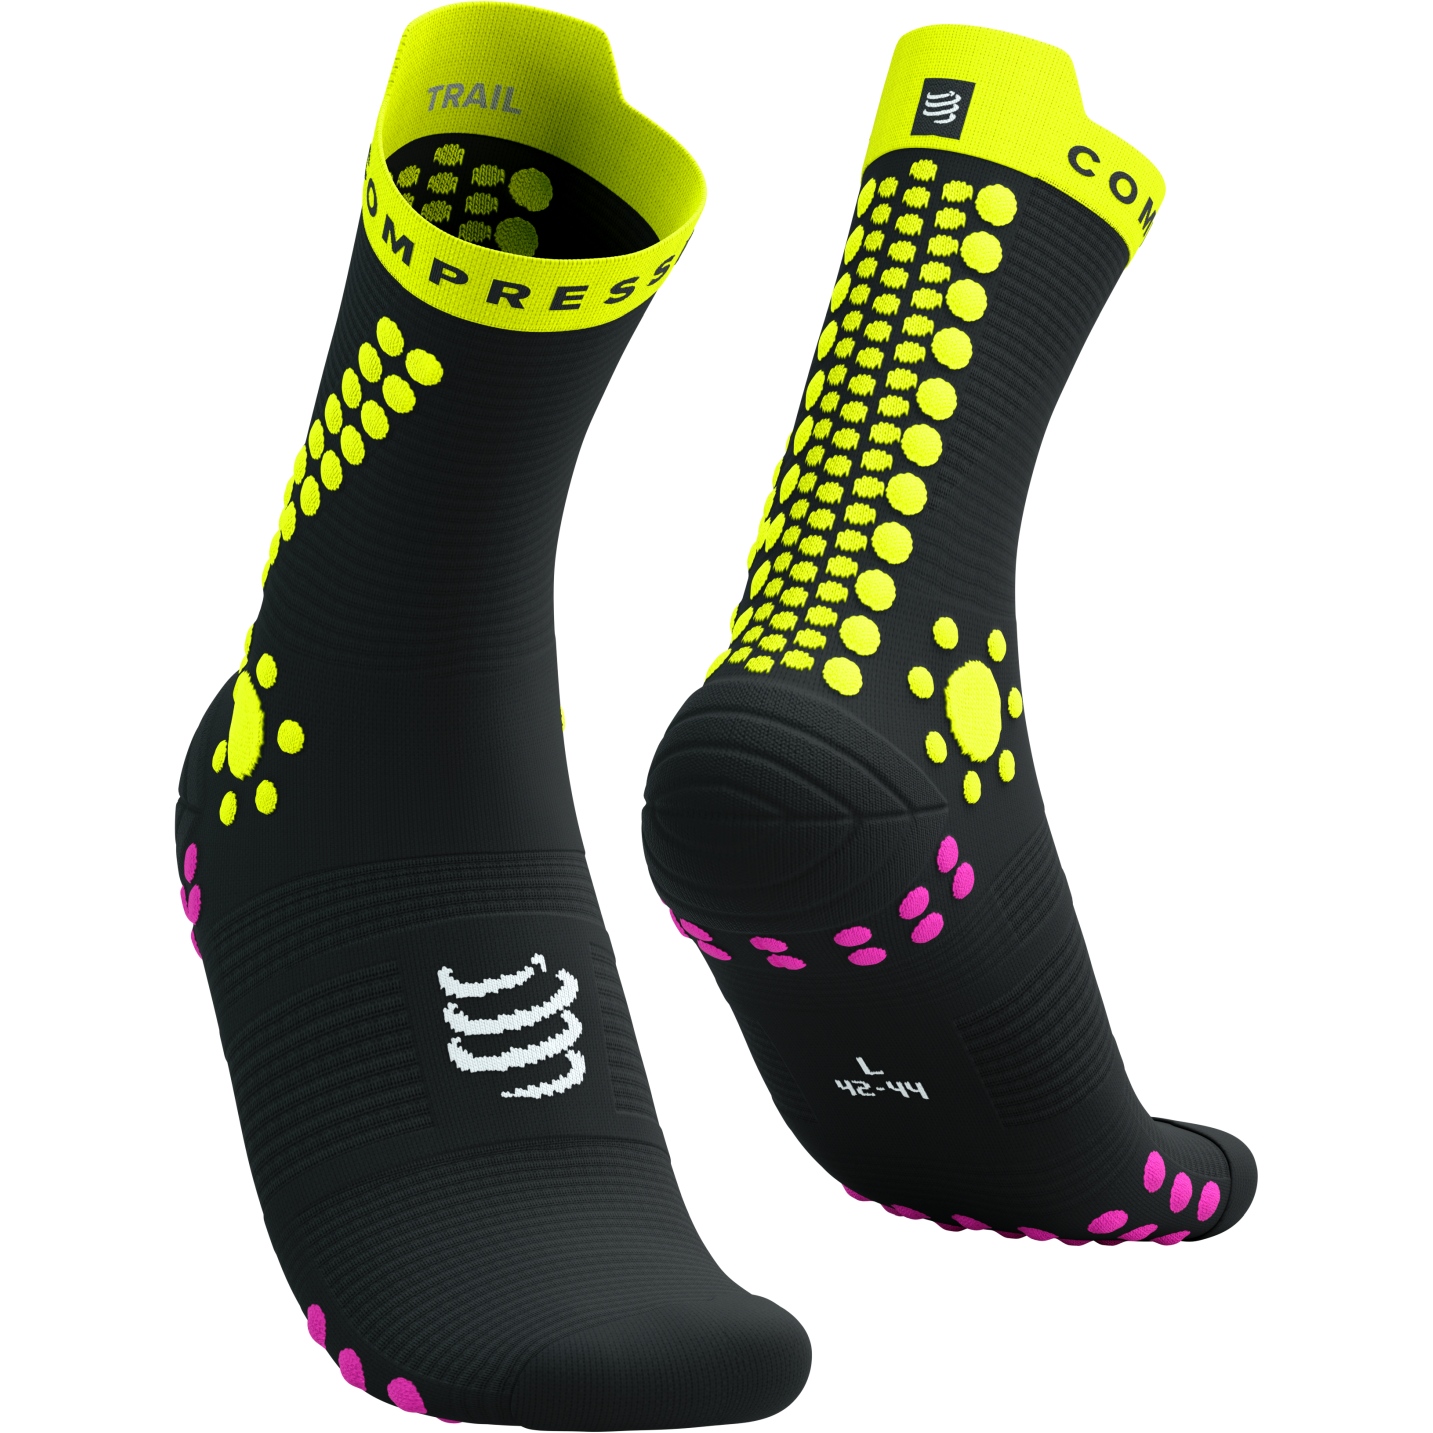 Image of Compressport Pro Racing Compression Socks v4.0 Trail - black/safety yellow/neon pink